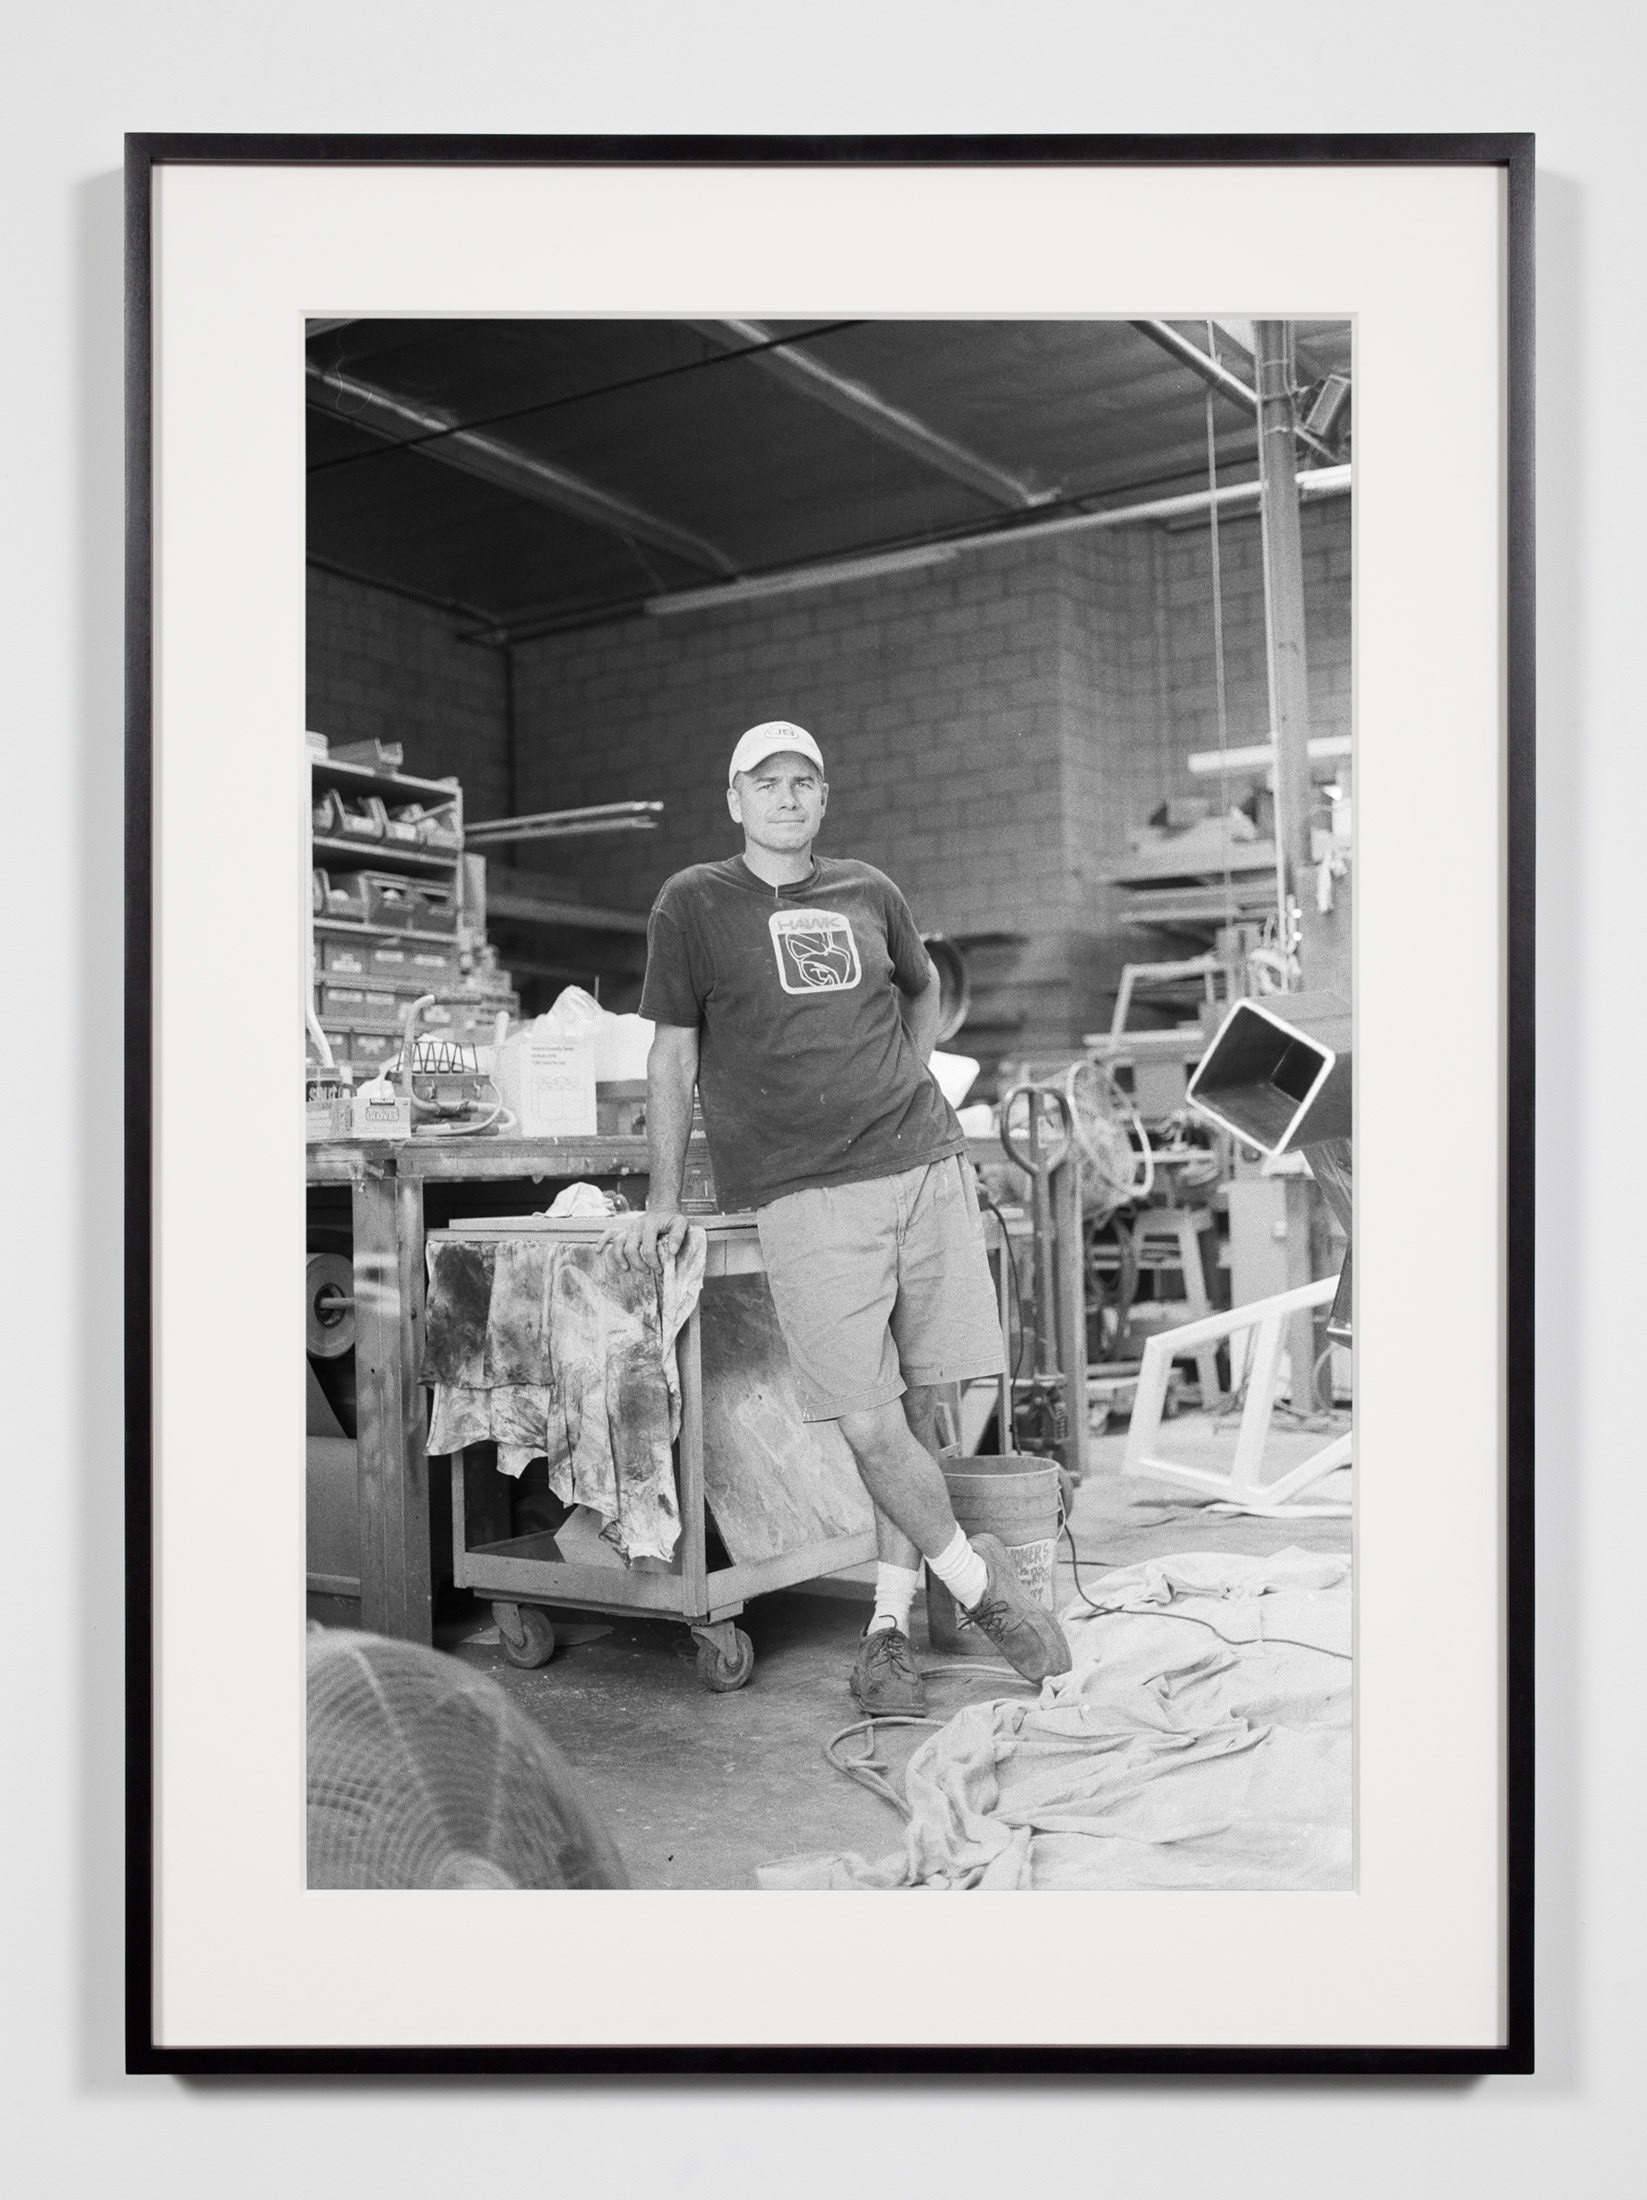   Fabricator, Glendale, California, July 9, 2008   2011  Epson Ultrachrome K3 archival ink jet print on Hahnemühle Photo Rag paper  36 3/8 x 26 3/8 inches   Industrial Portraits, 2008–    A Diagram of Forces, 2011     